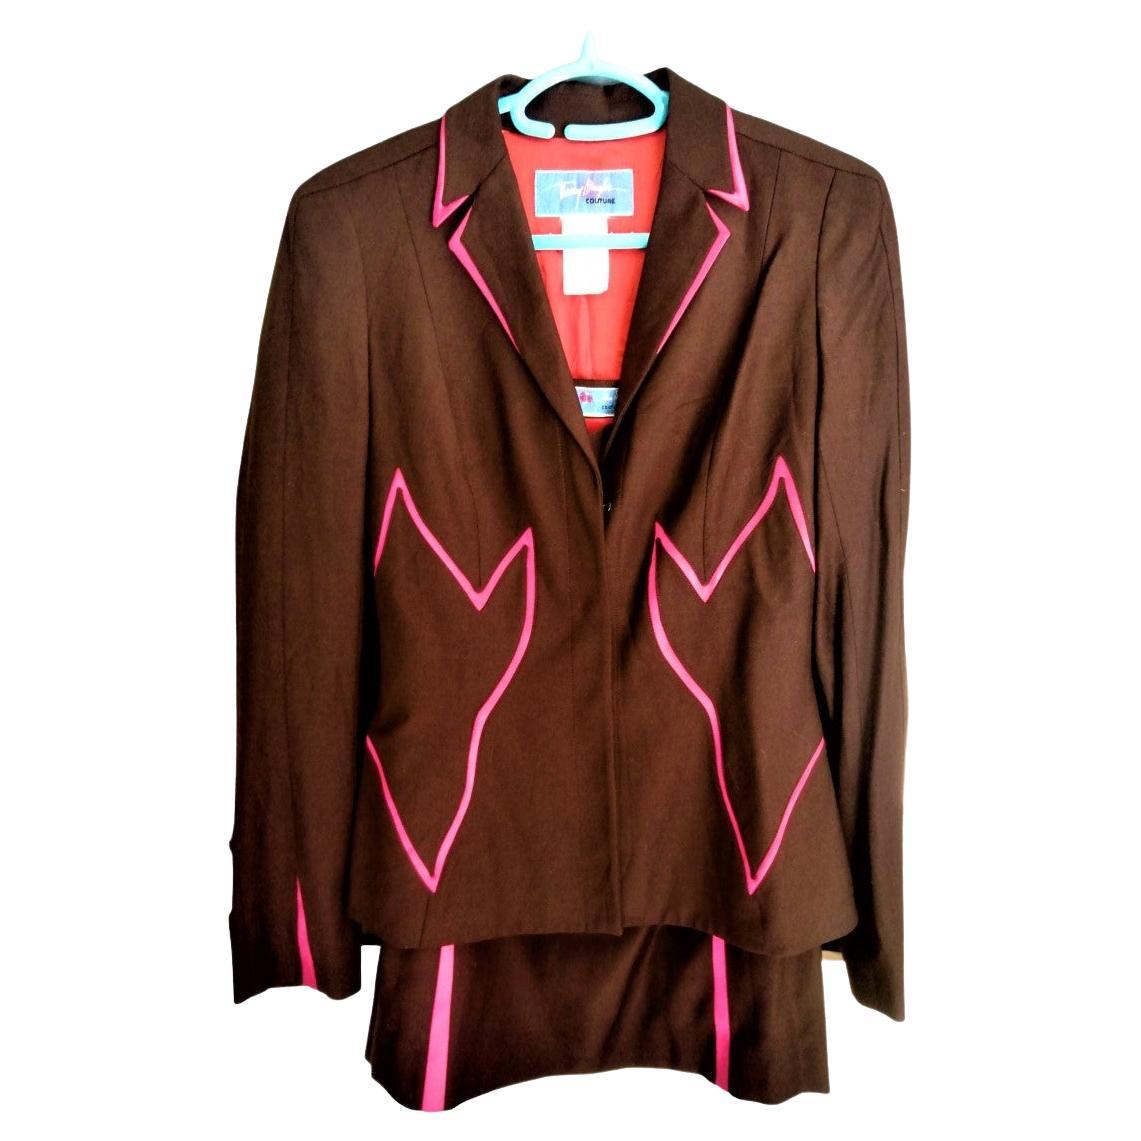 80s Thierry Mugler Couture Wool And Hot Pink Silk Insets Wasp Waist Dramatic Set Jacket Blazer Skirt Ensemble

Super striking 1980s black silk and wool Thierry Mugler couture jacket + skirt.
This set is amazing! And as always with vintage Mugler it